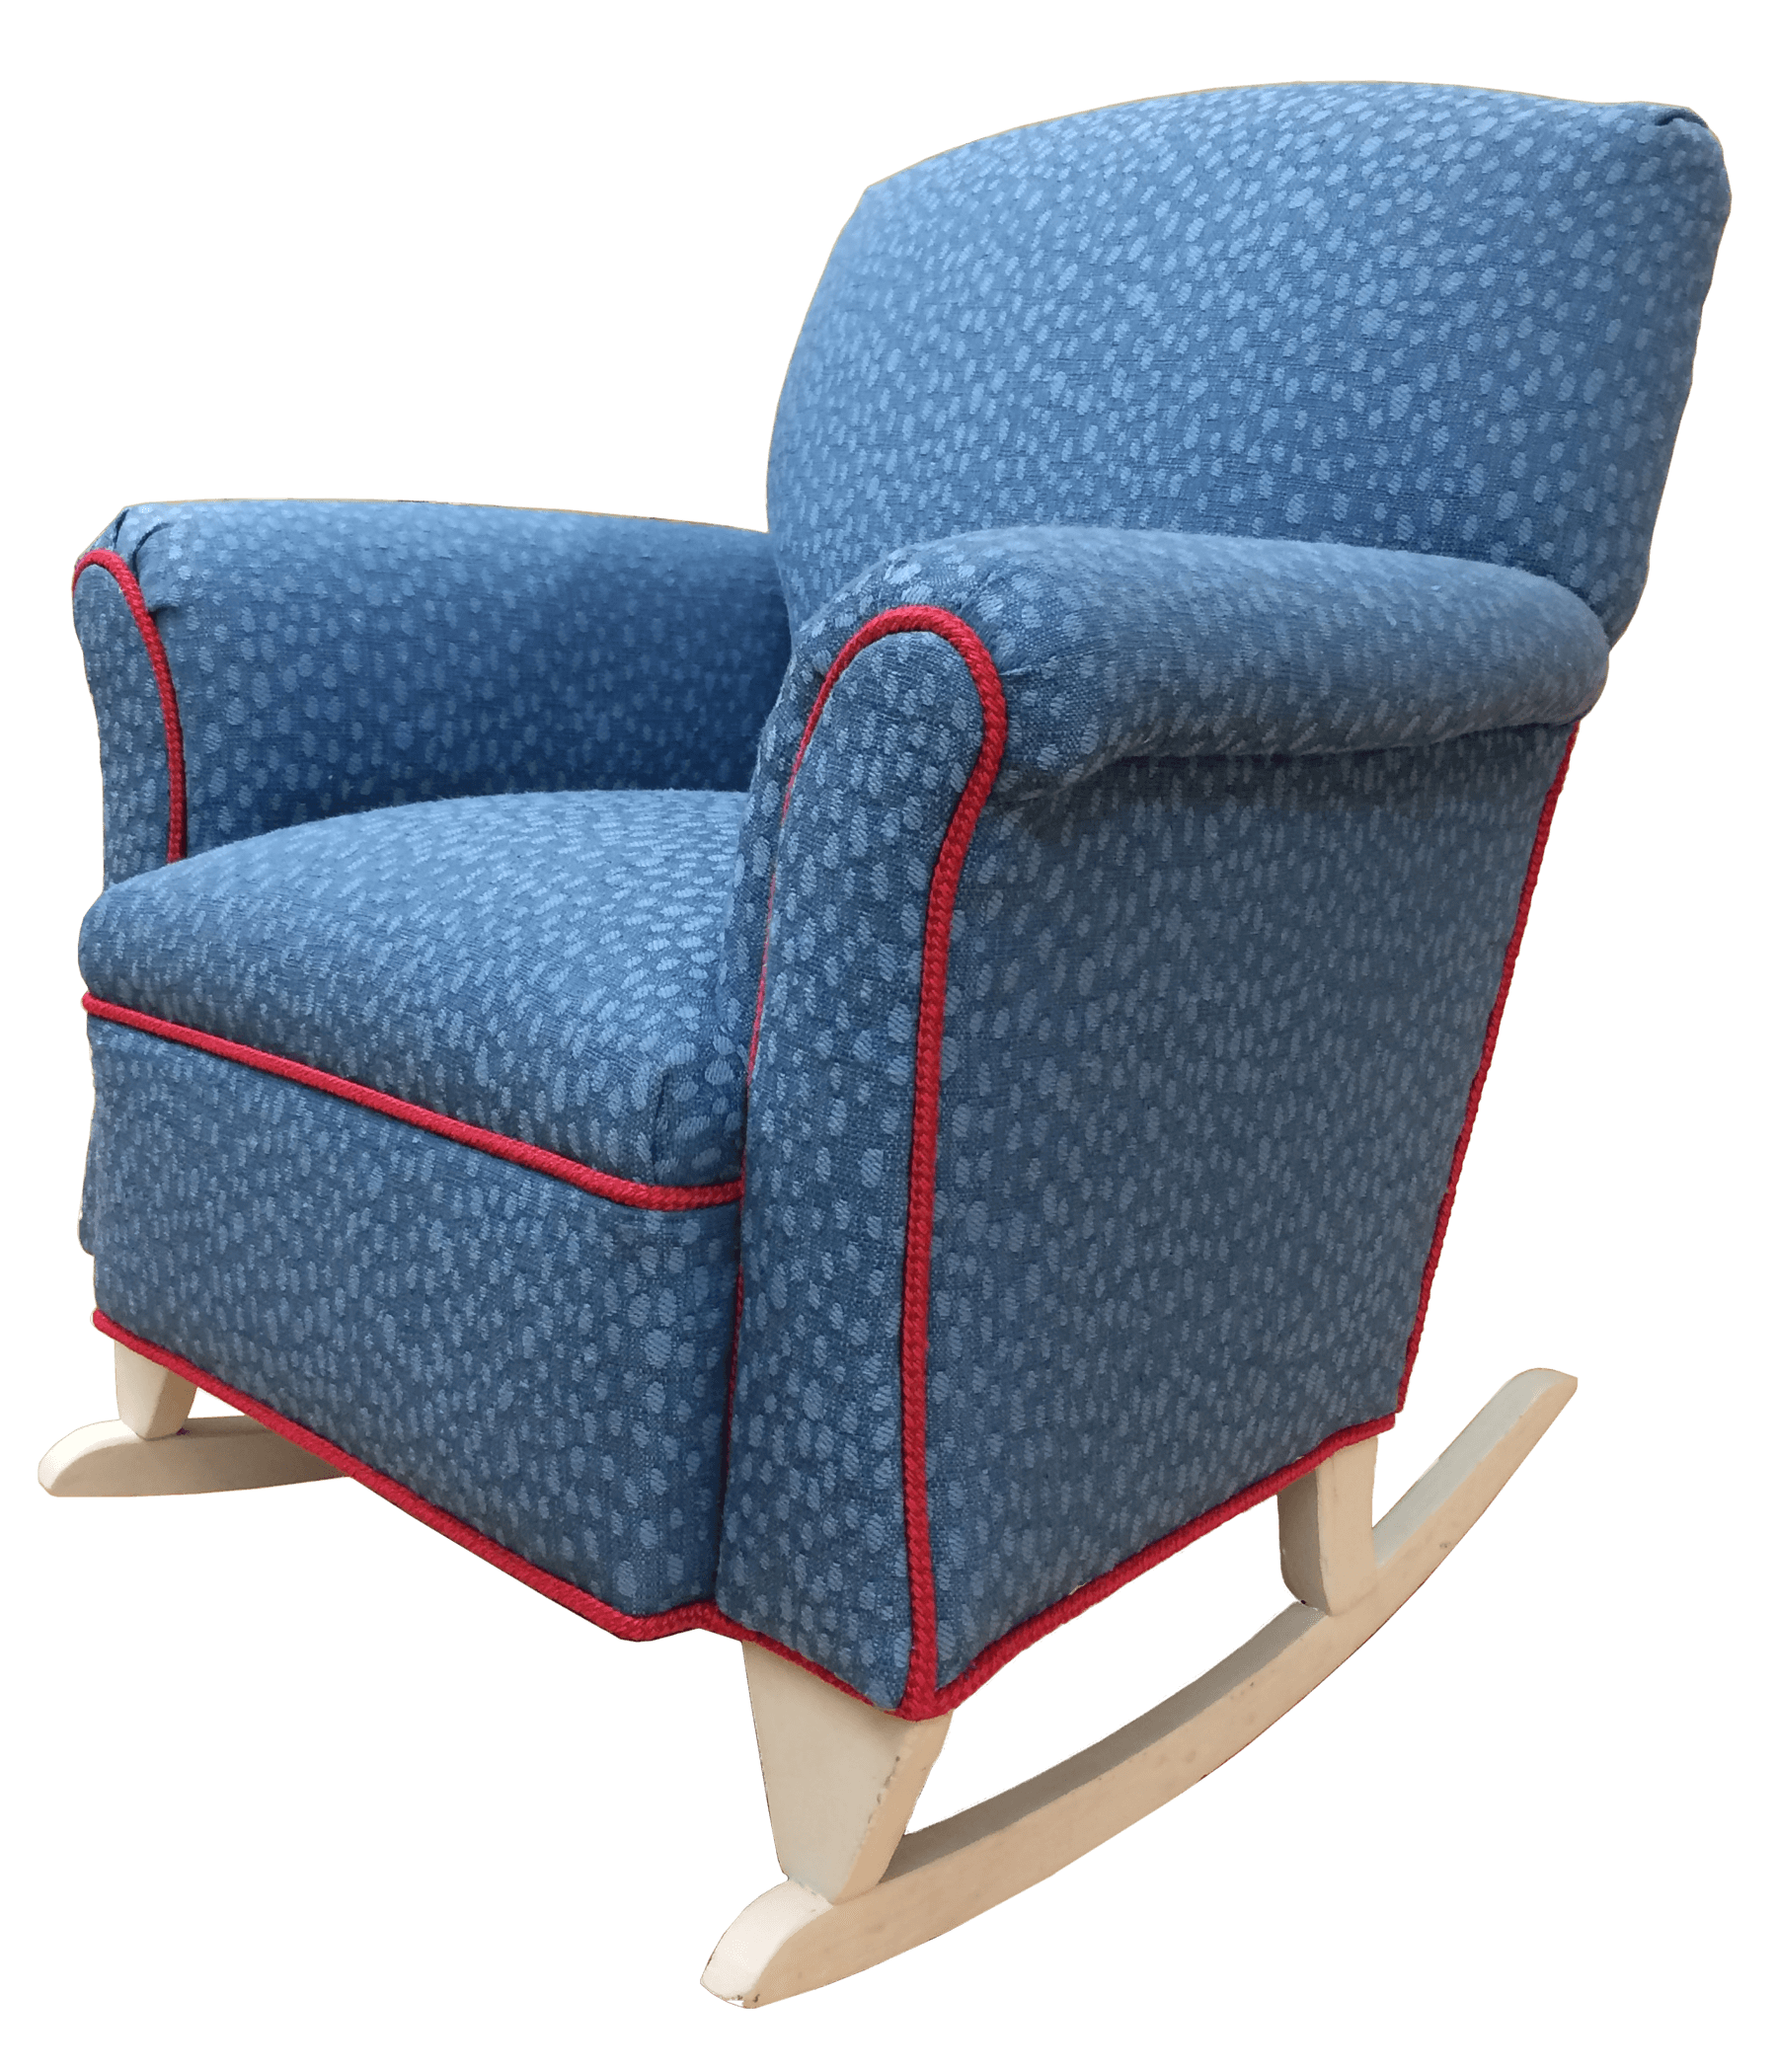 Childrens' spotted blue rocking chair